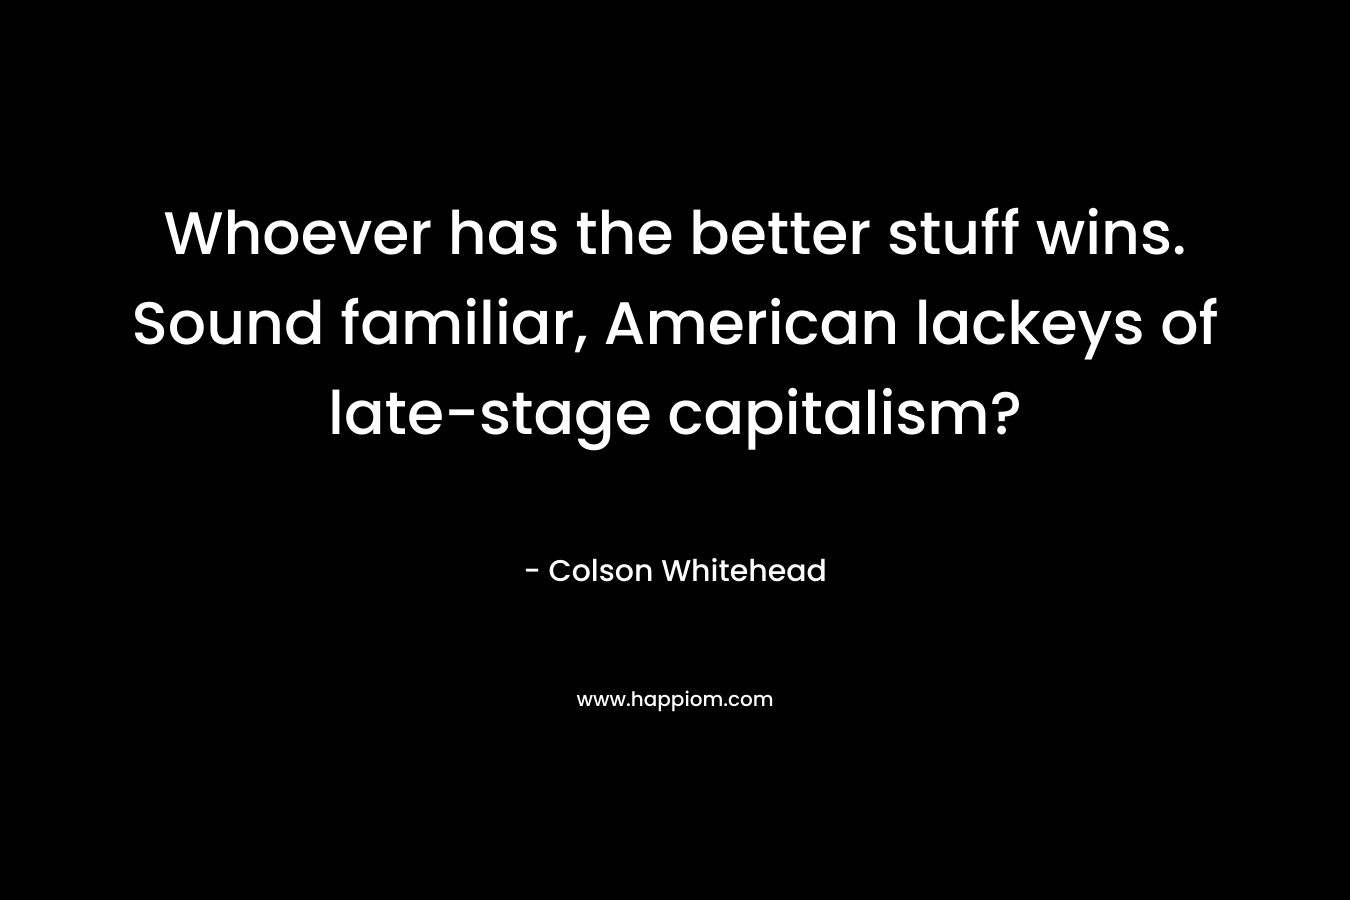 Whoever has the better stuff wins. Sound familiar, American lackeys of late-stage capitalism? – Colson Whitehead